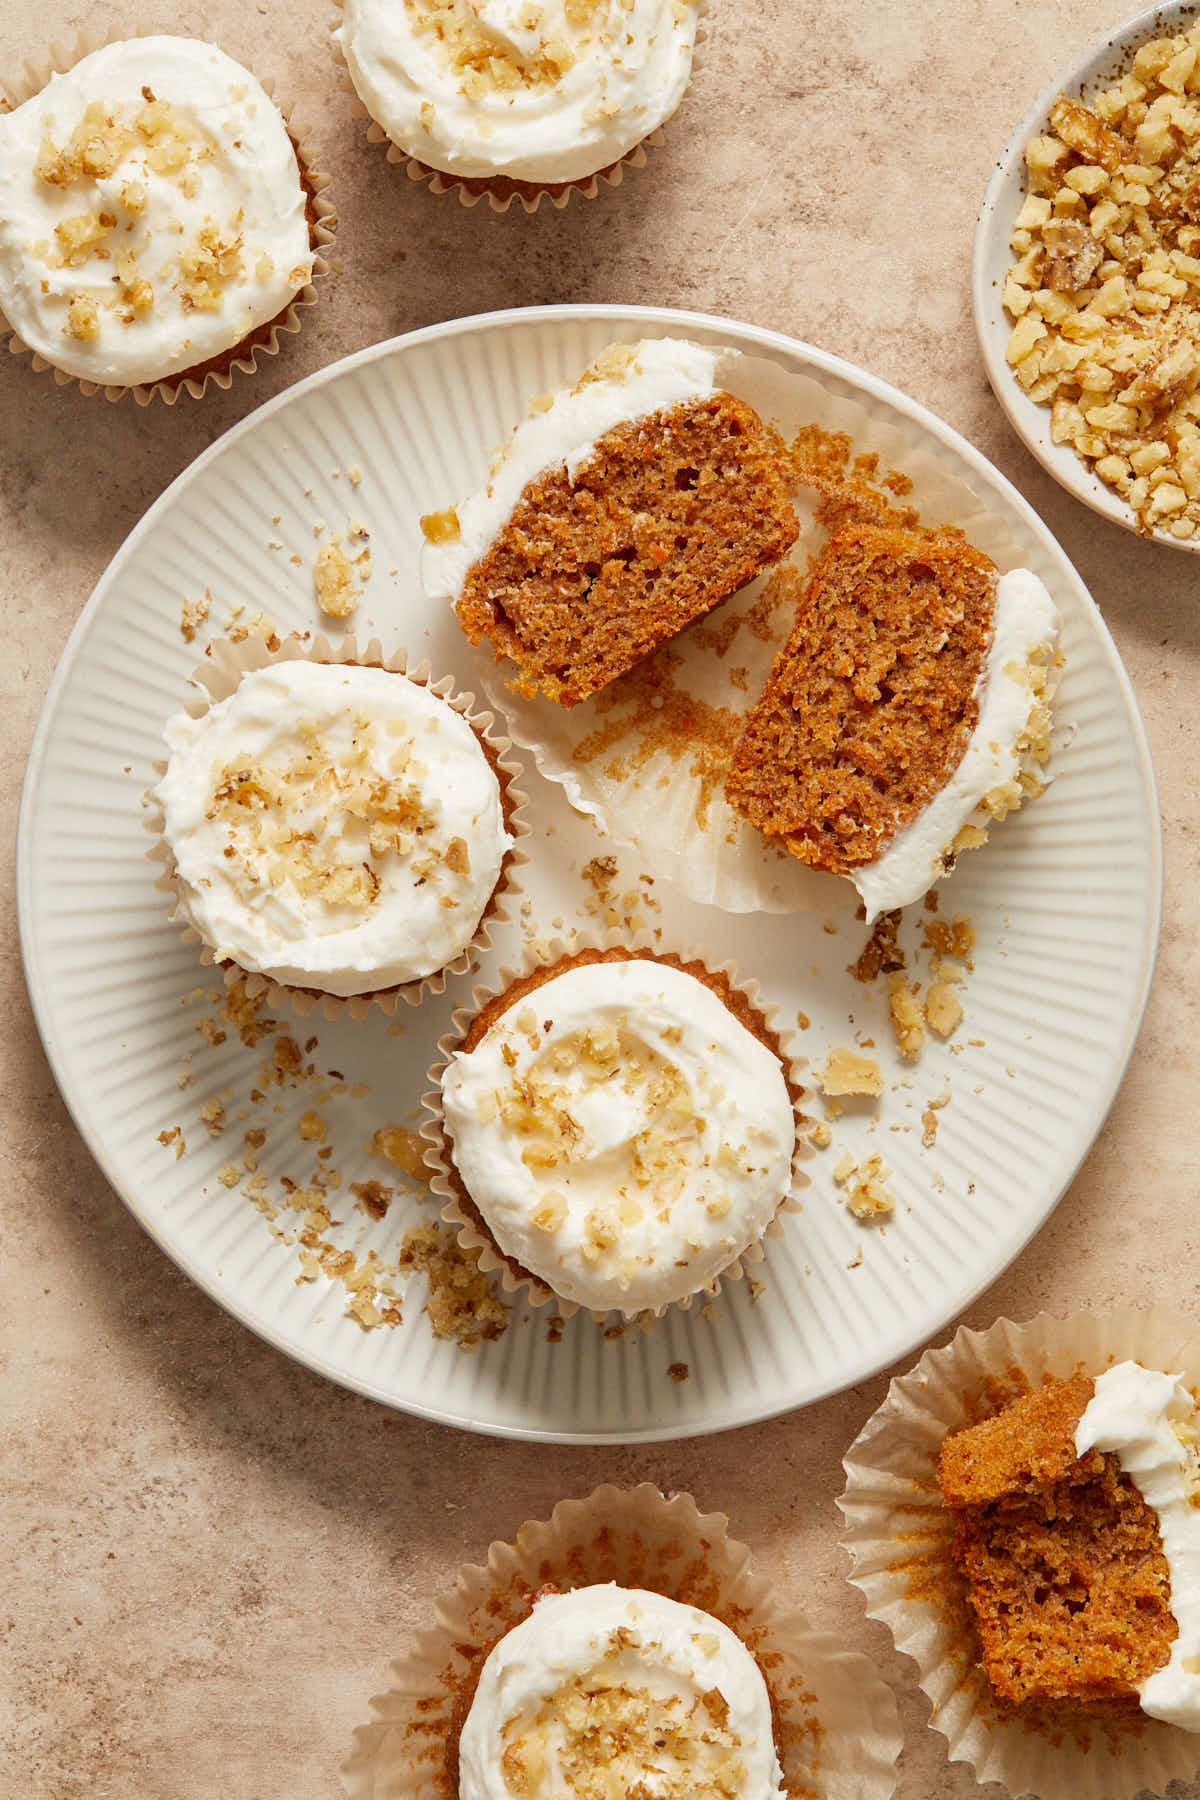 Carrot cupcakes arranged on a plate with one cut in half.